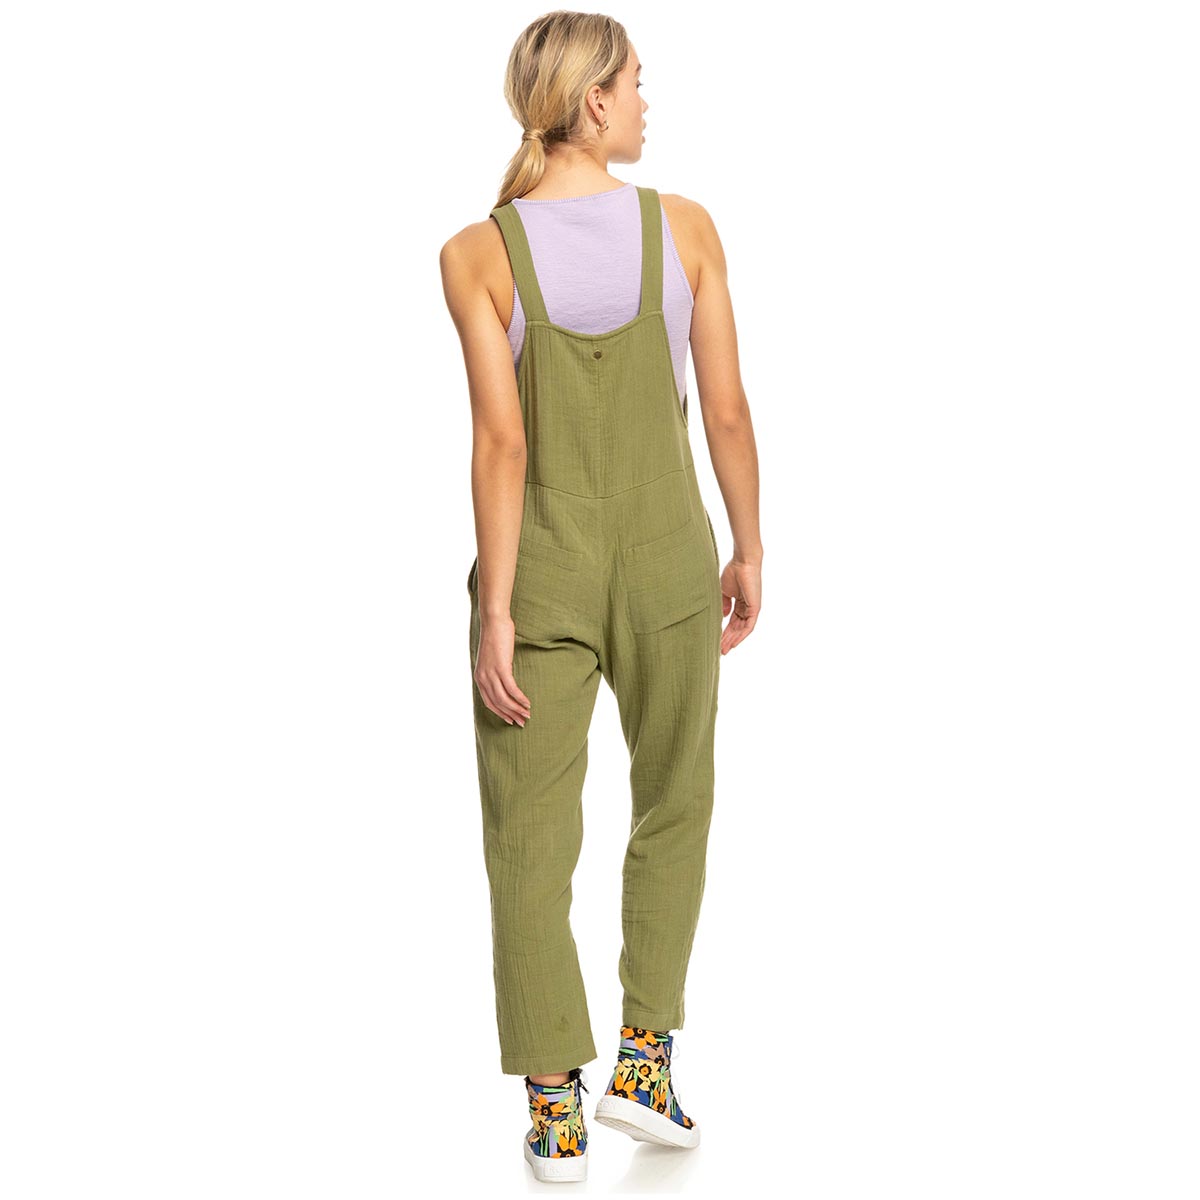 ROXY - BEACHSIDE LOVE ANKLE LENGTH STRAPPY JUMPSUIT